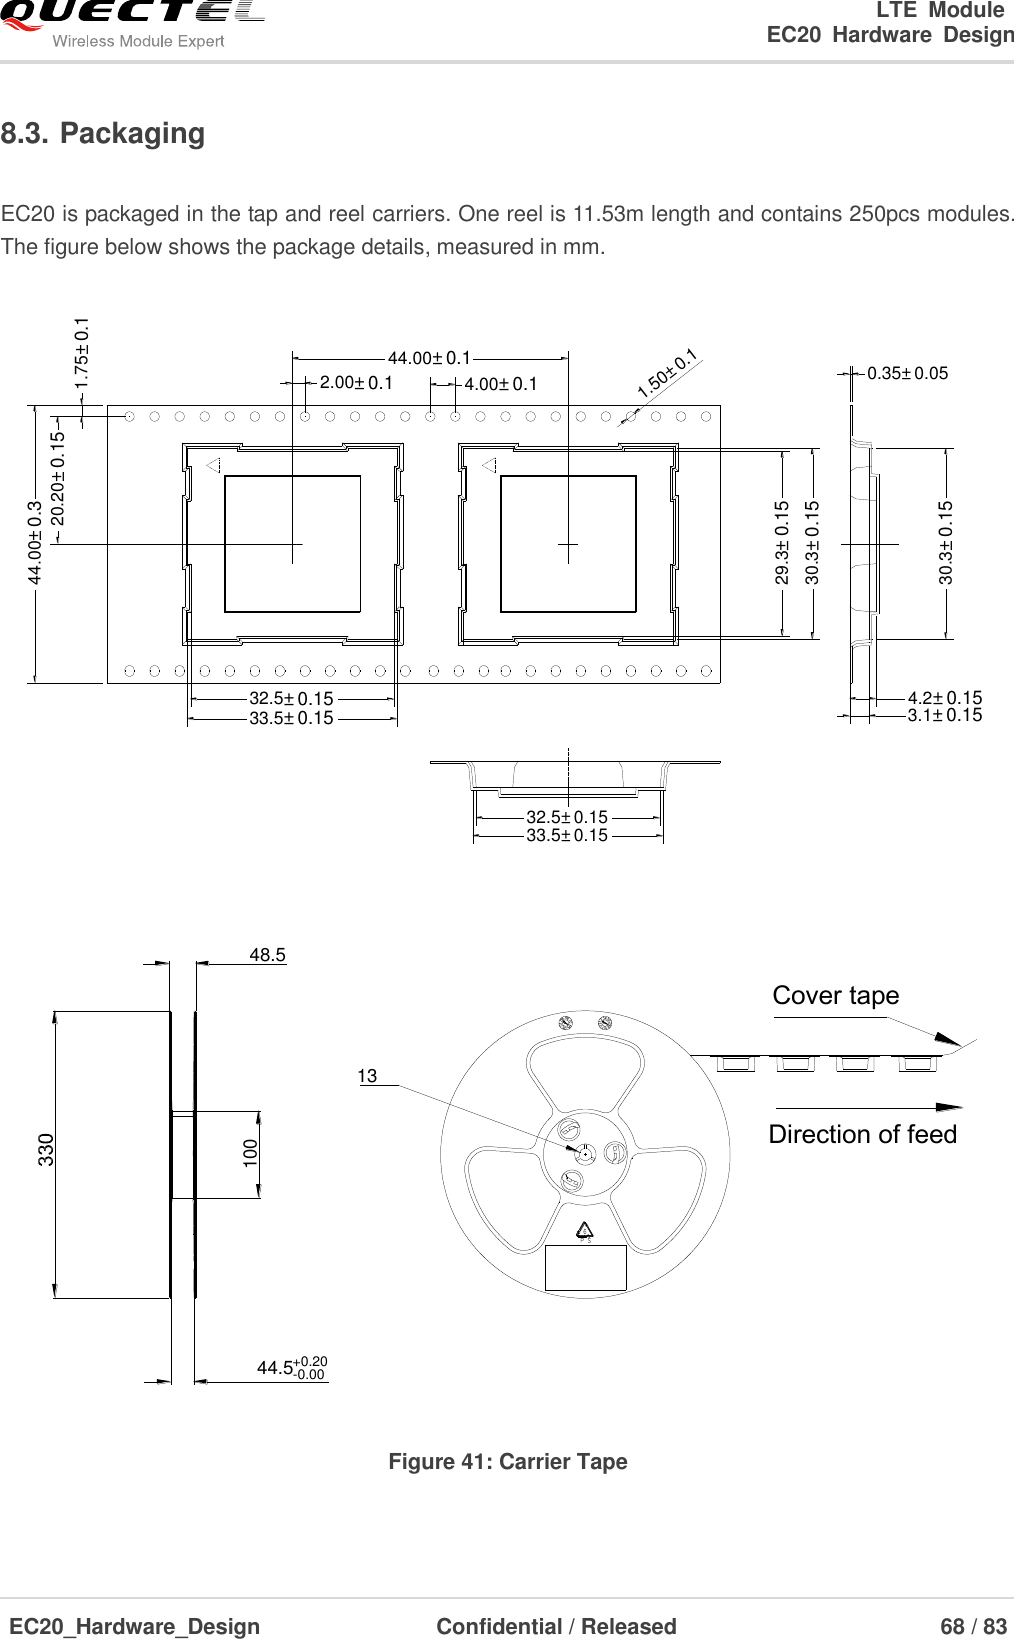                                                                        LTE  Module                                                                   EC20  Hardware  Design  EC20_Hardware_Design                  Confidential / Released                            68 / 83     8.3. Packaging  EC20 is packaged in the tap and reel carriers. One reel is 11.53m length and contains 250pcs modules. The figure below shows the package details, measured in mm.  30.3±0.1529.3±0.1530.3±0.1532.5±0.1533.5±0.150.35±0.054.2±0.153.1±0.1532.5±0.1533.5±0.154.00±0.12.00±0.11.75±0.120.20±0.1544.00±0.344.00±0.11.50±0.1  Direction of feedCover tape1310044.5+0.20-0.0048.5 Figure 41: Carrier Tape  